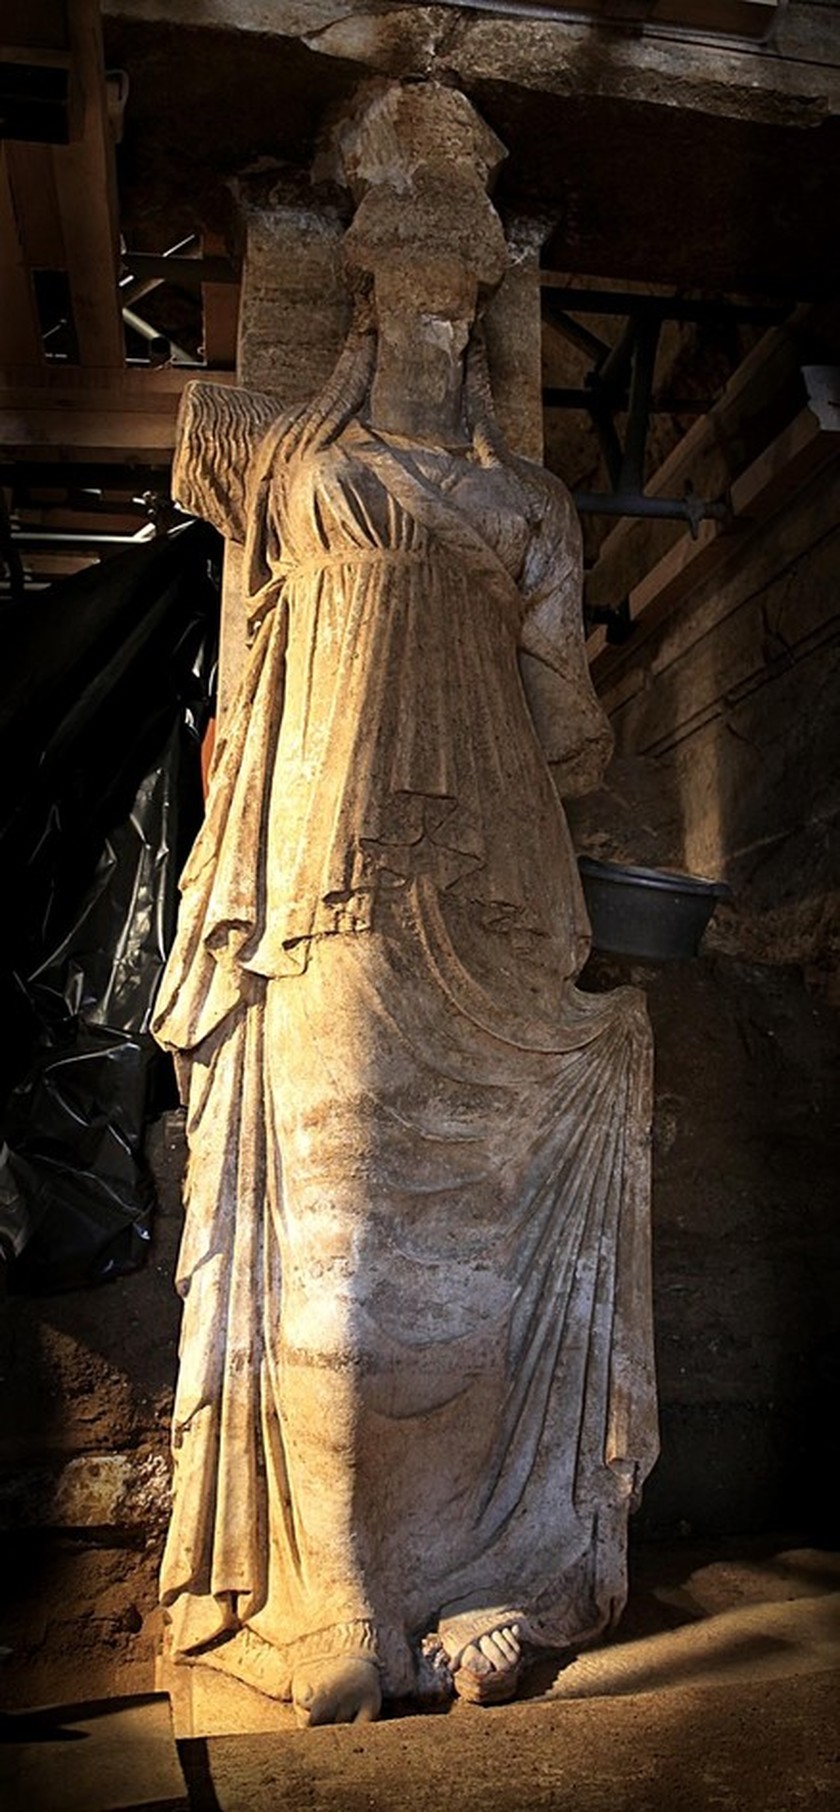 Amphipolis: Photos that show the glory of the Caryatids